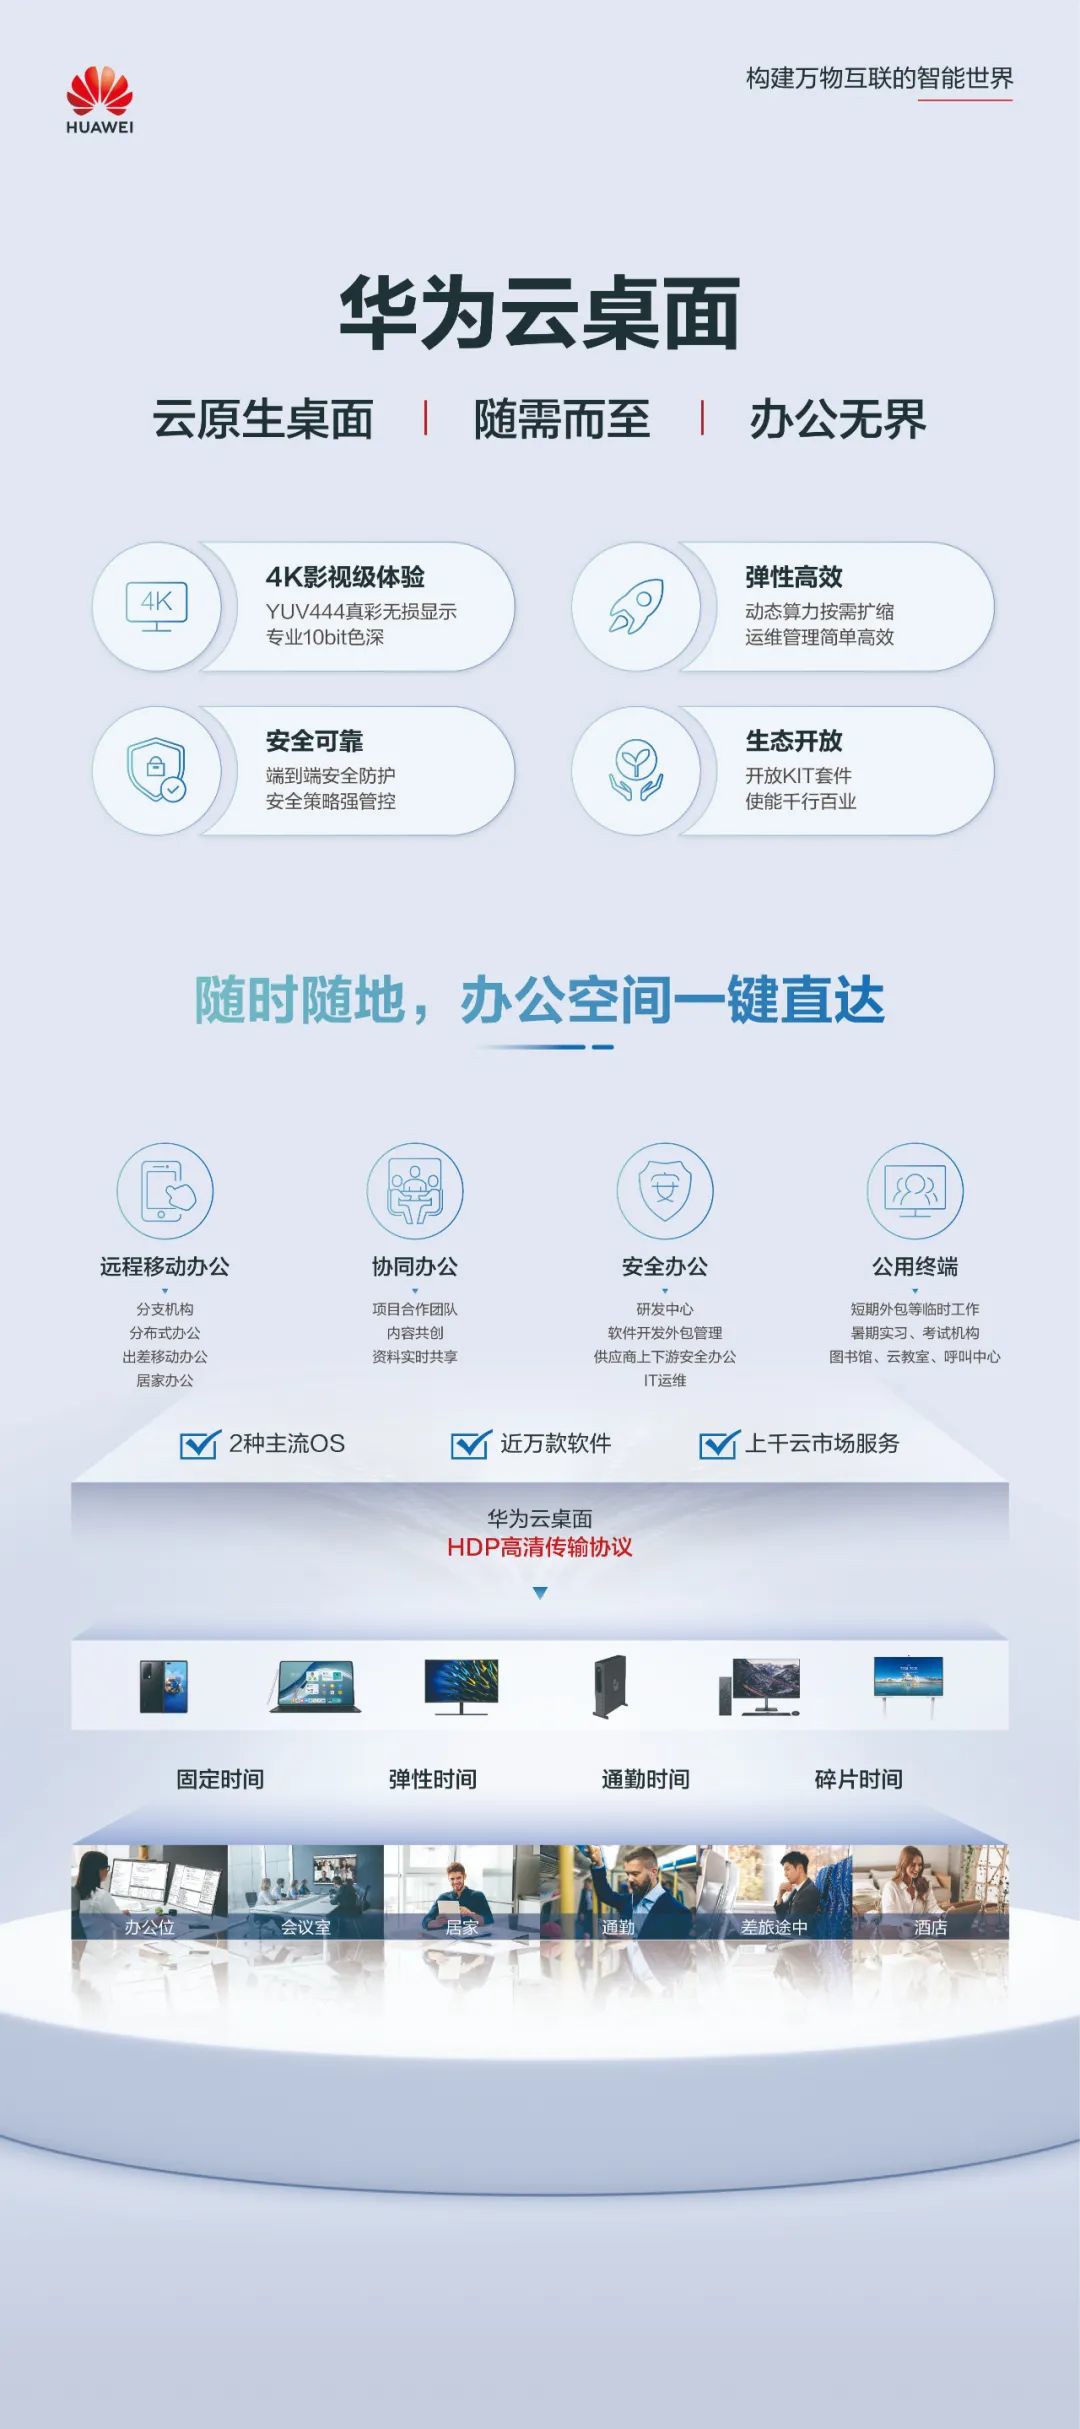 Huawei Cloud Desktop officially commercialized-3